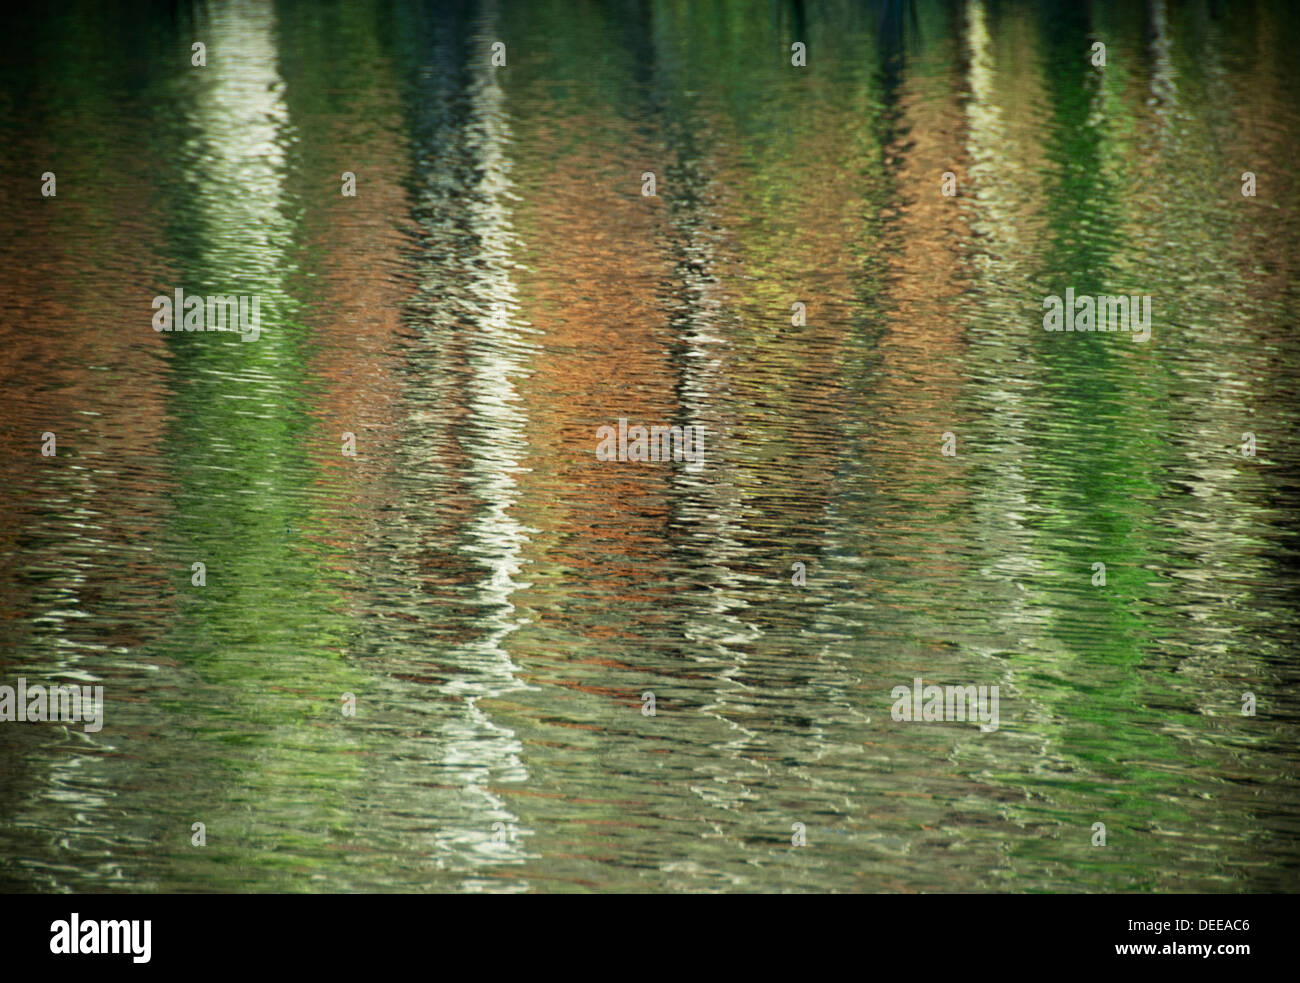 Reflections of trees in water, autumn Stock Photo